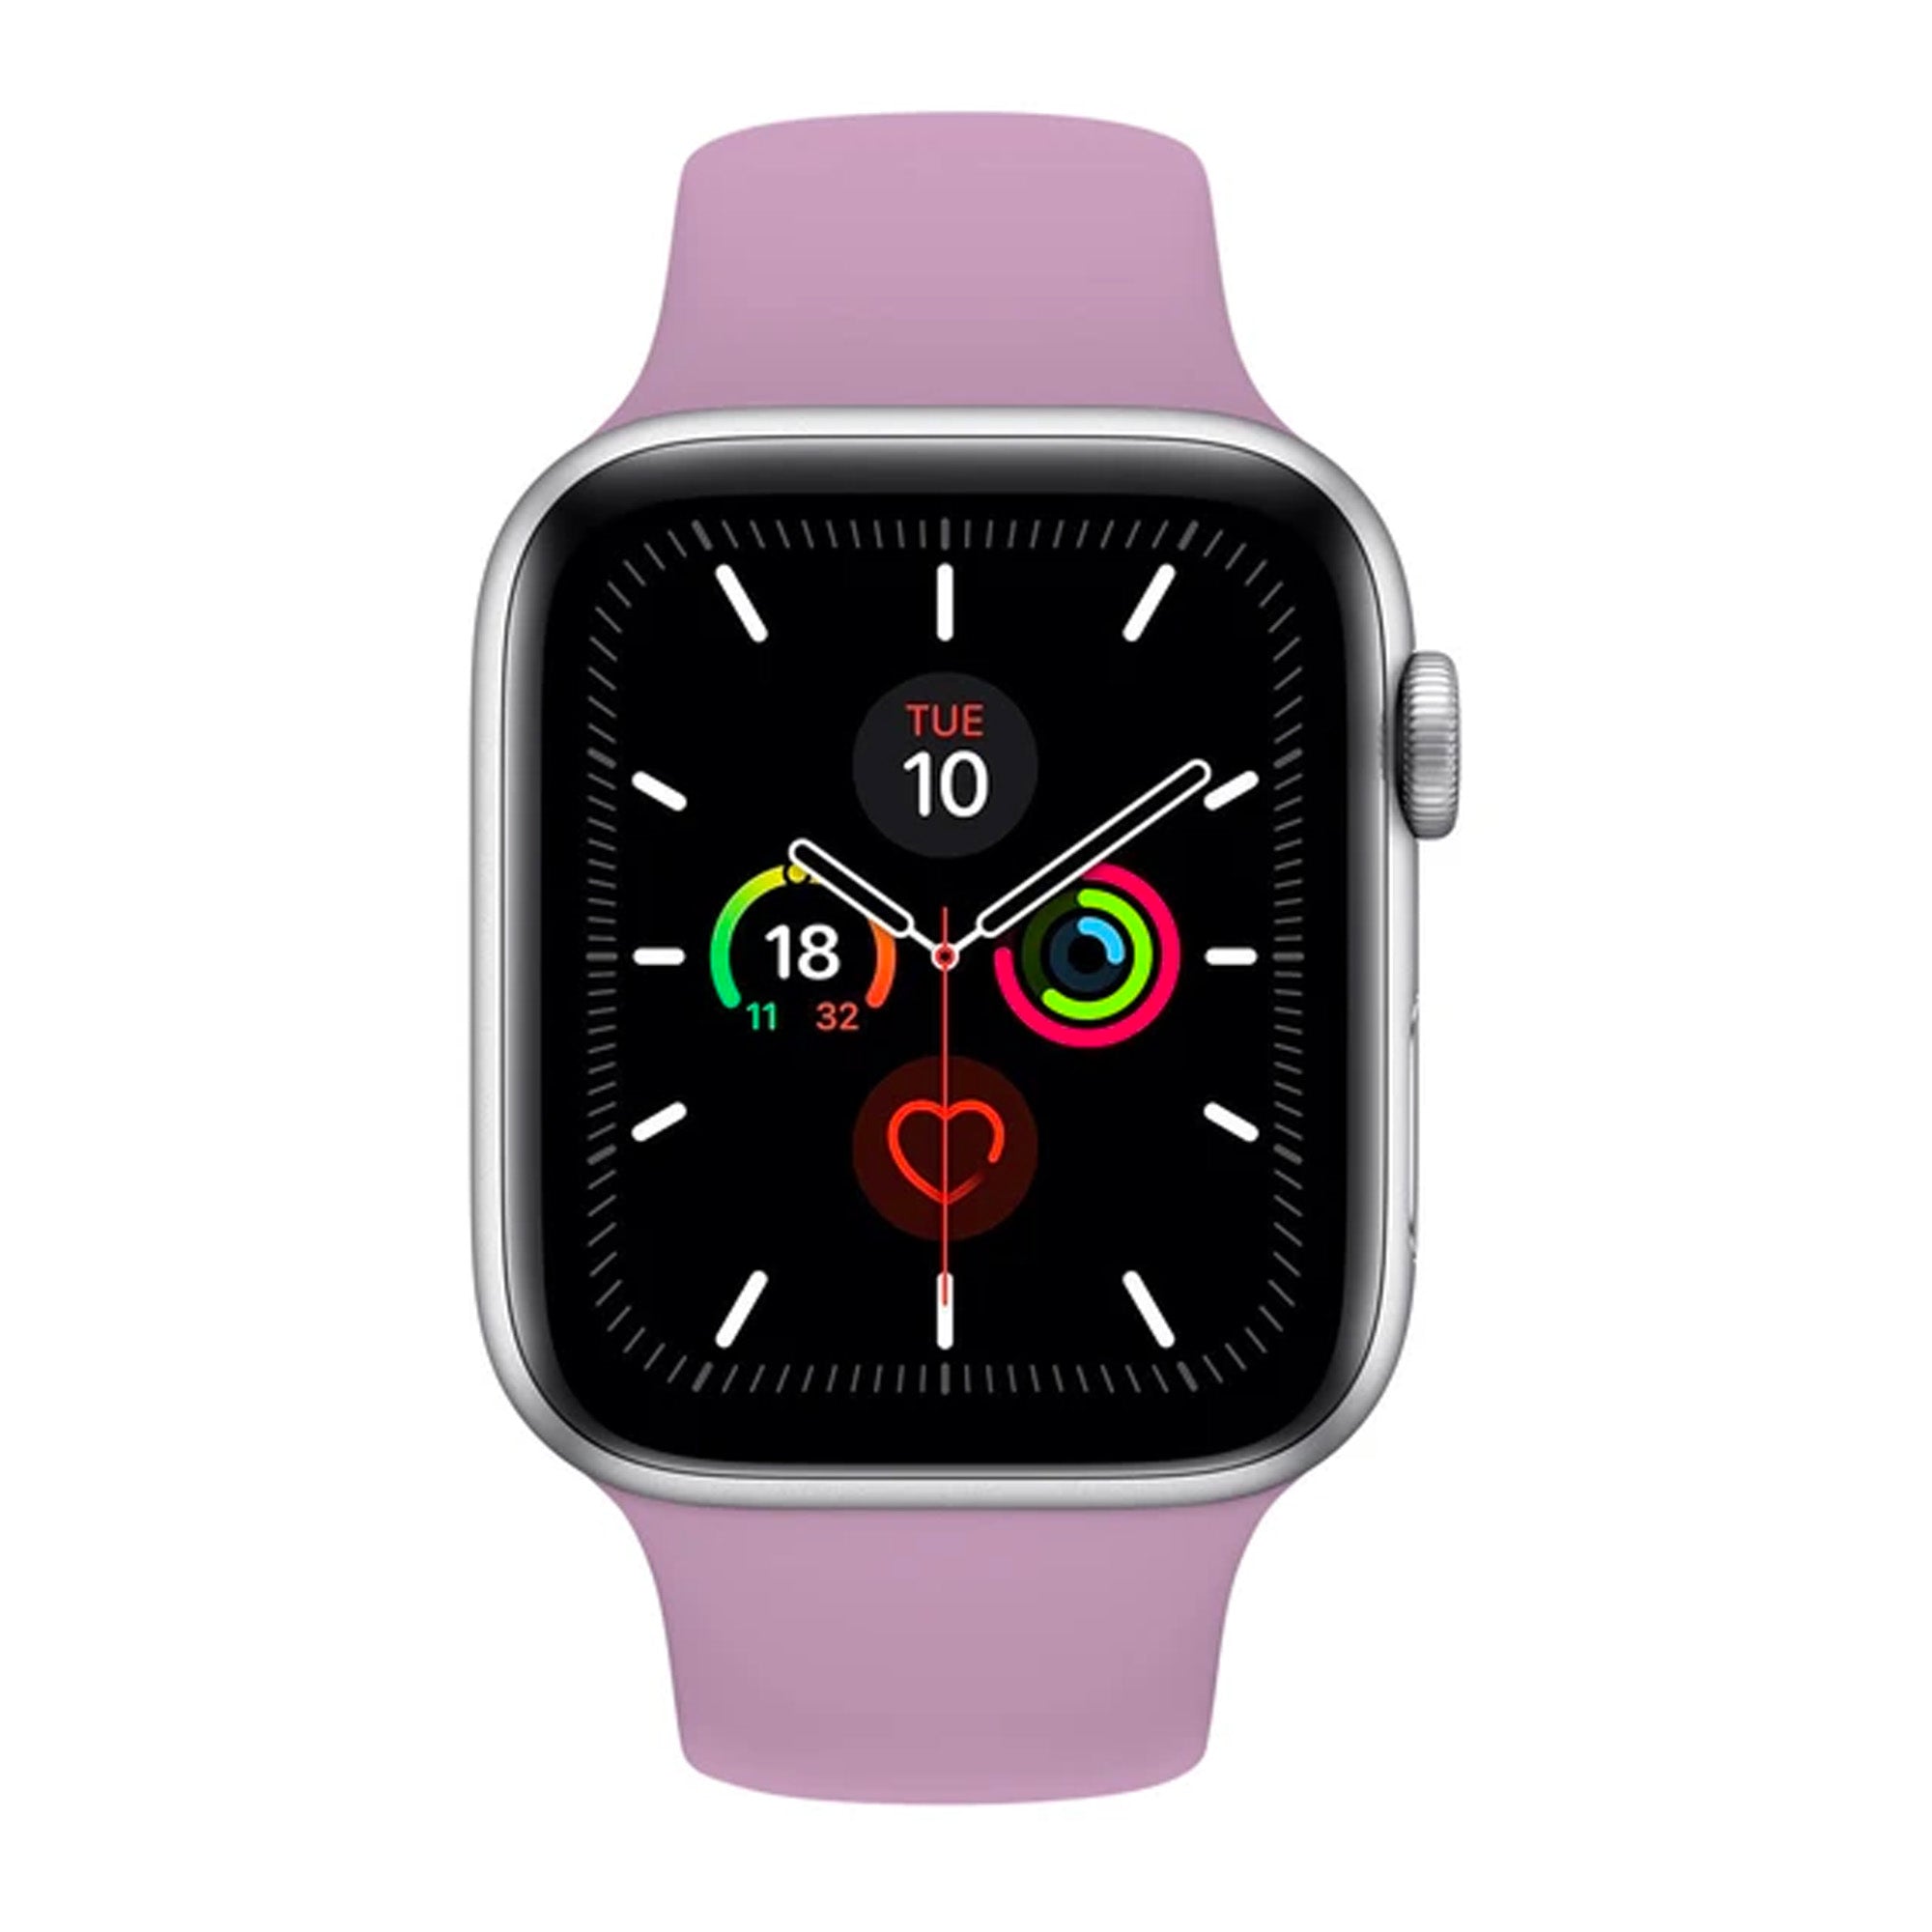 Lavender Silicone Band for Apple Watch Silicone Bands   Accessories Gifts UK